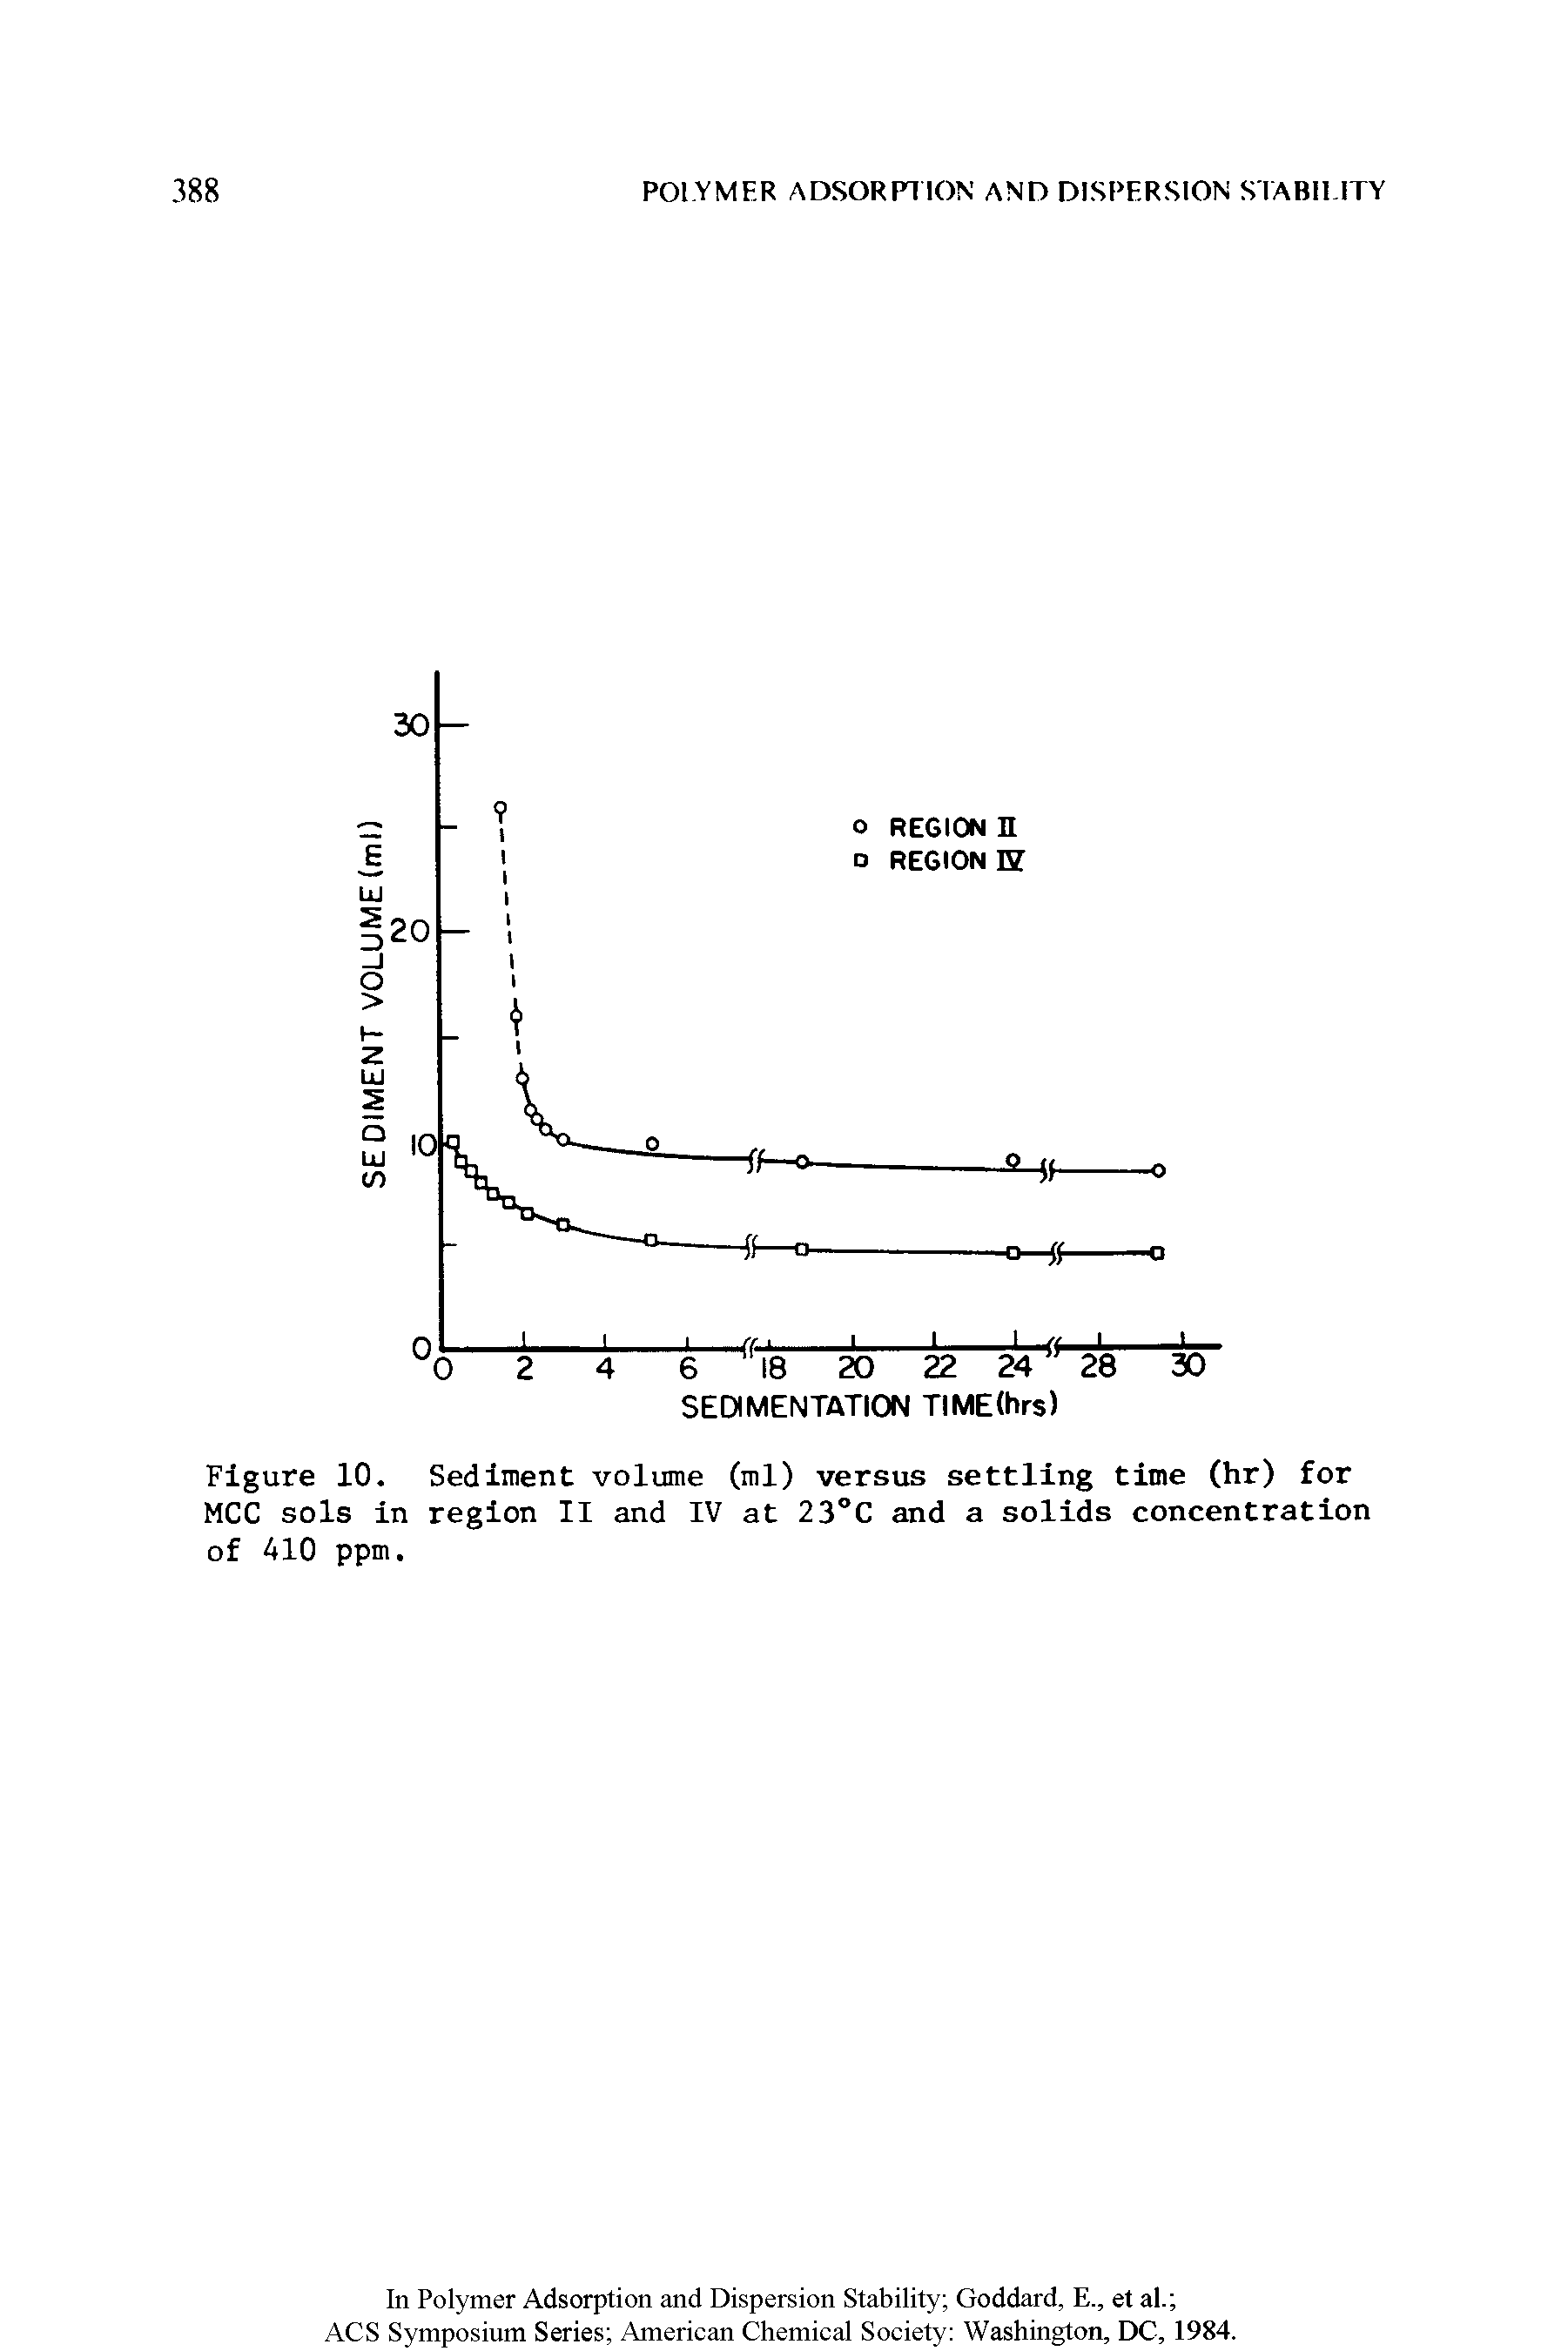 Figure 10. Sediment volume (ml) versus settling time (hr) for MCC sols in region II and IV at 23°C and a solids concentration of 410 ppm.